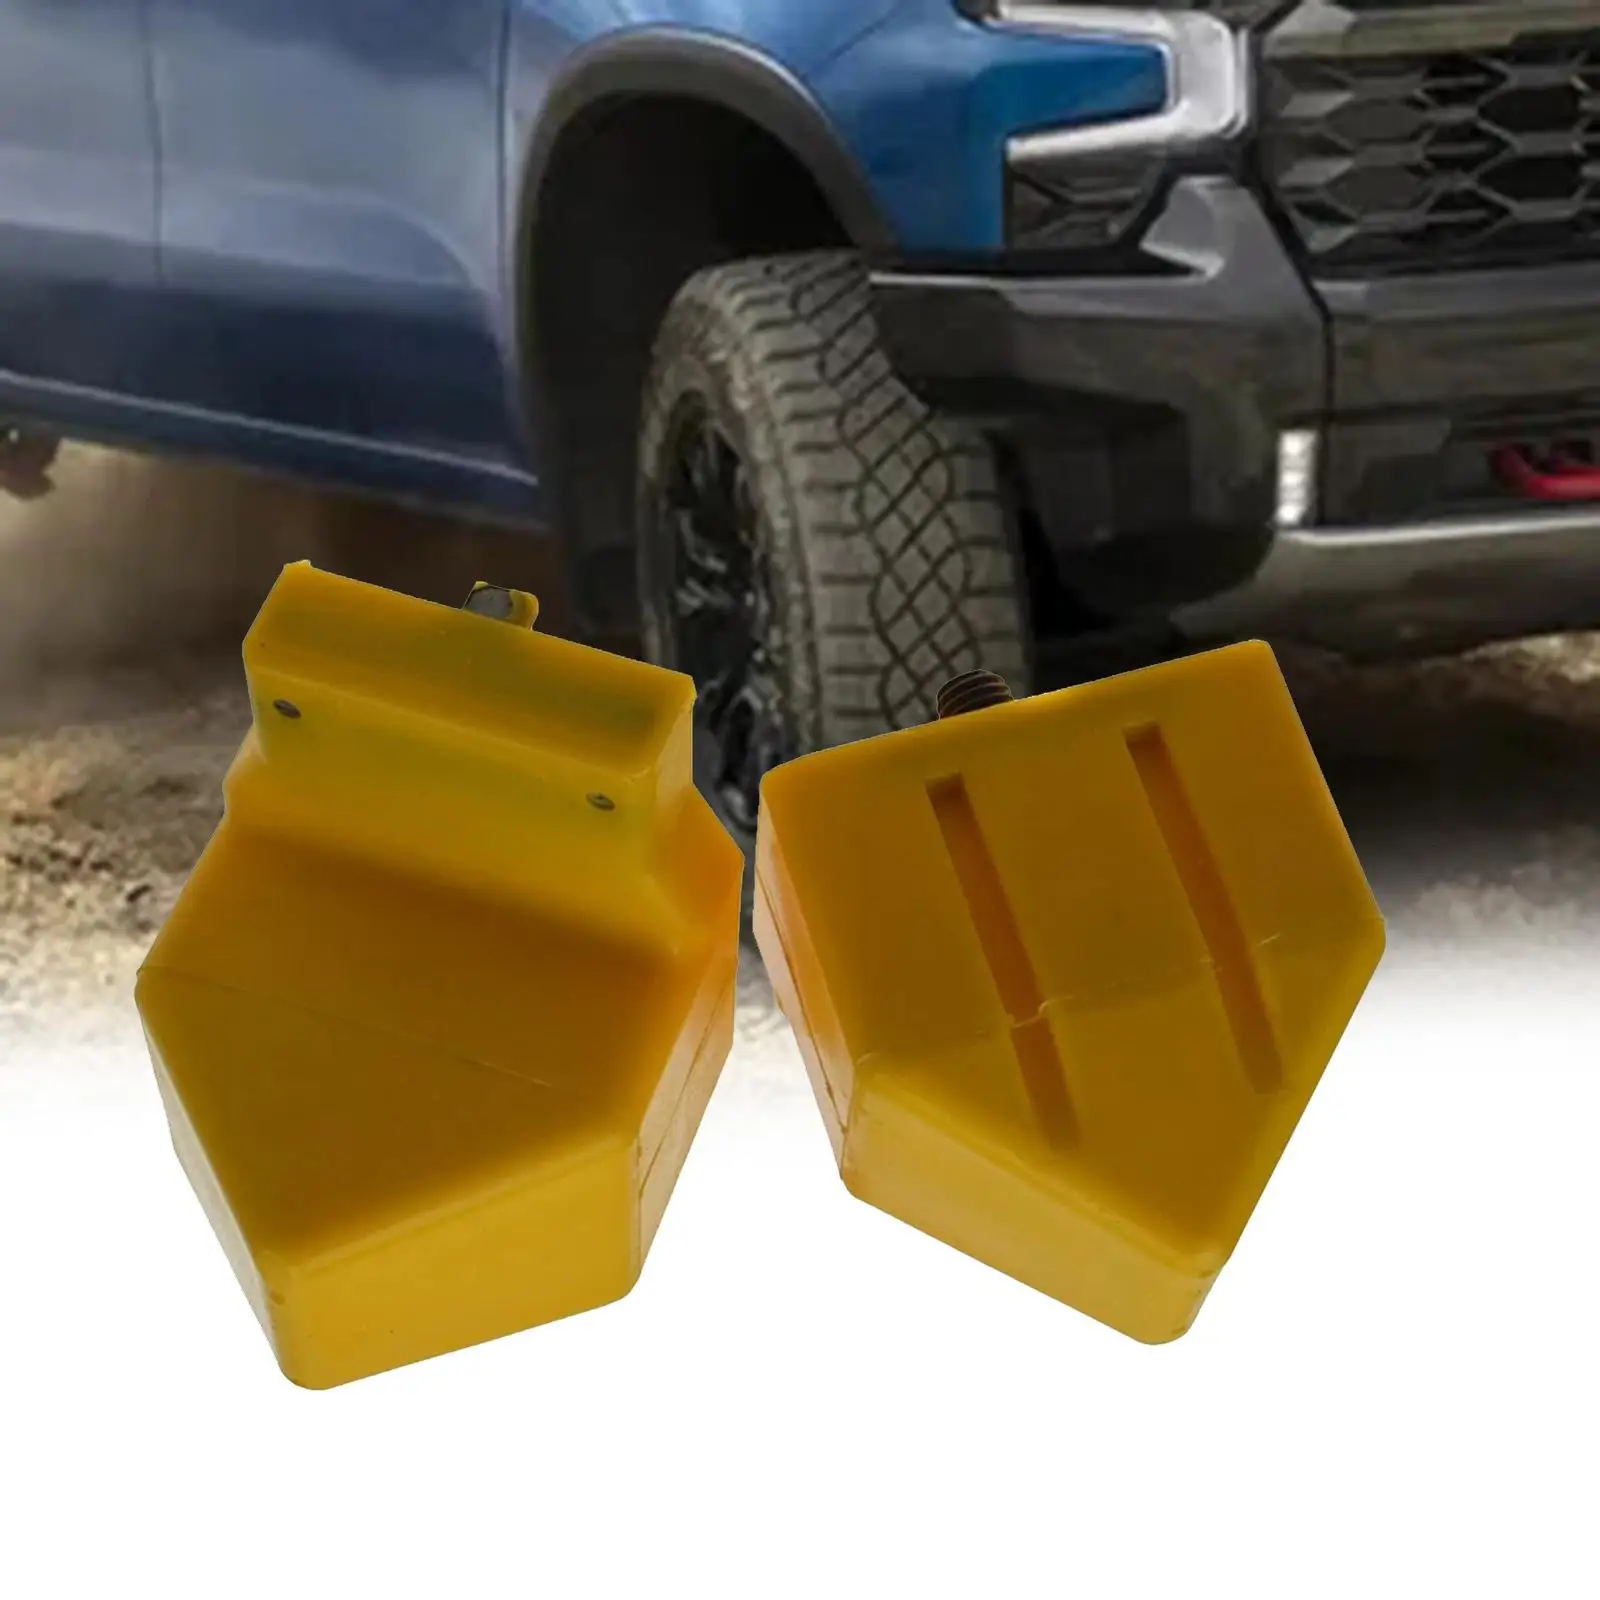 2Pcs Auto Front bumpers stopper Parts for GMC Sierra 2500 HD Pickup Truck SUV